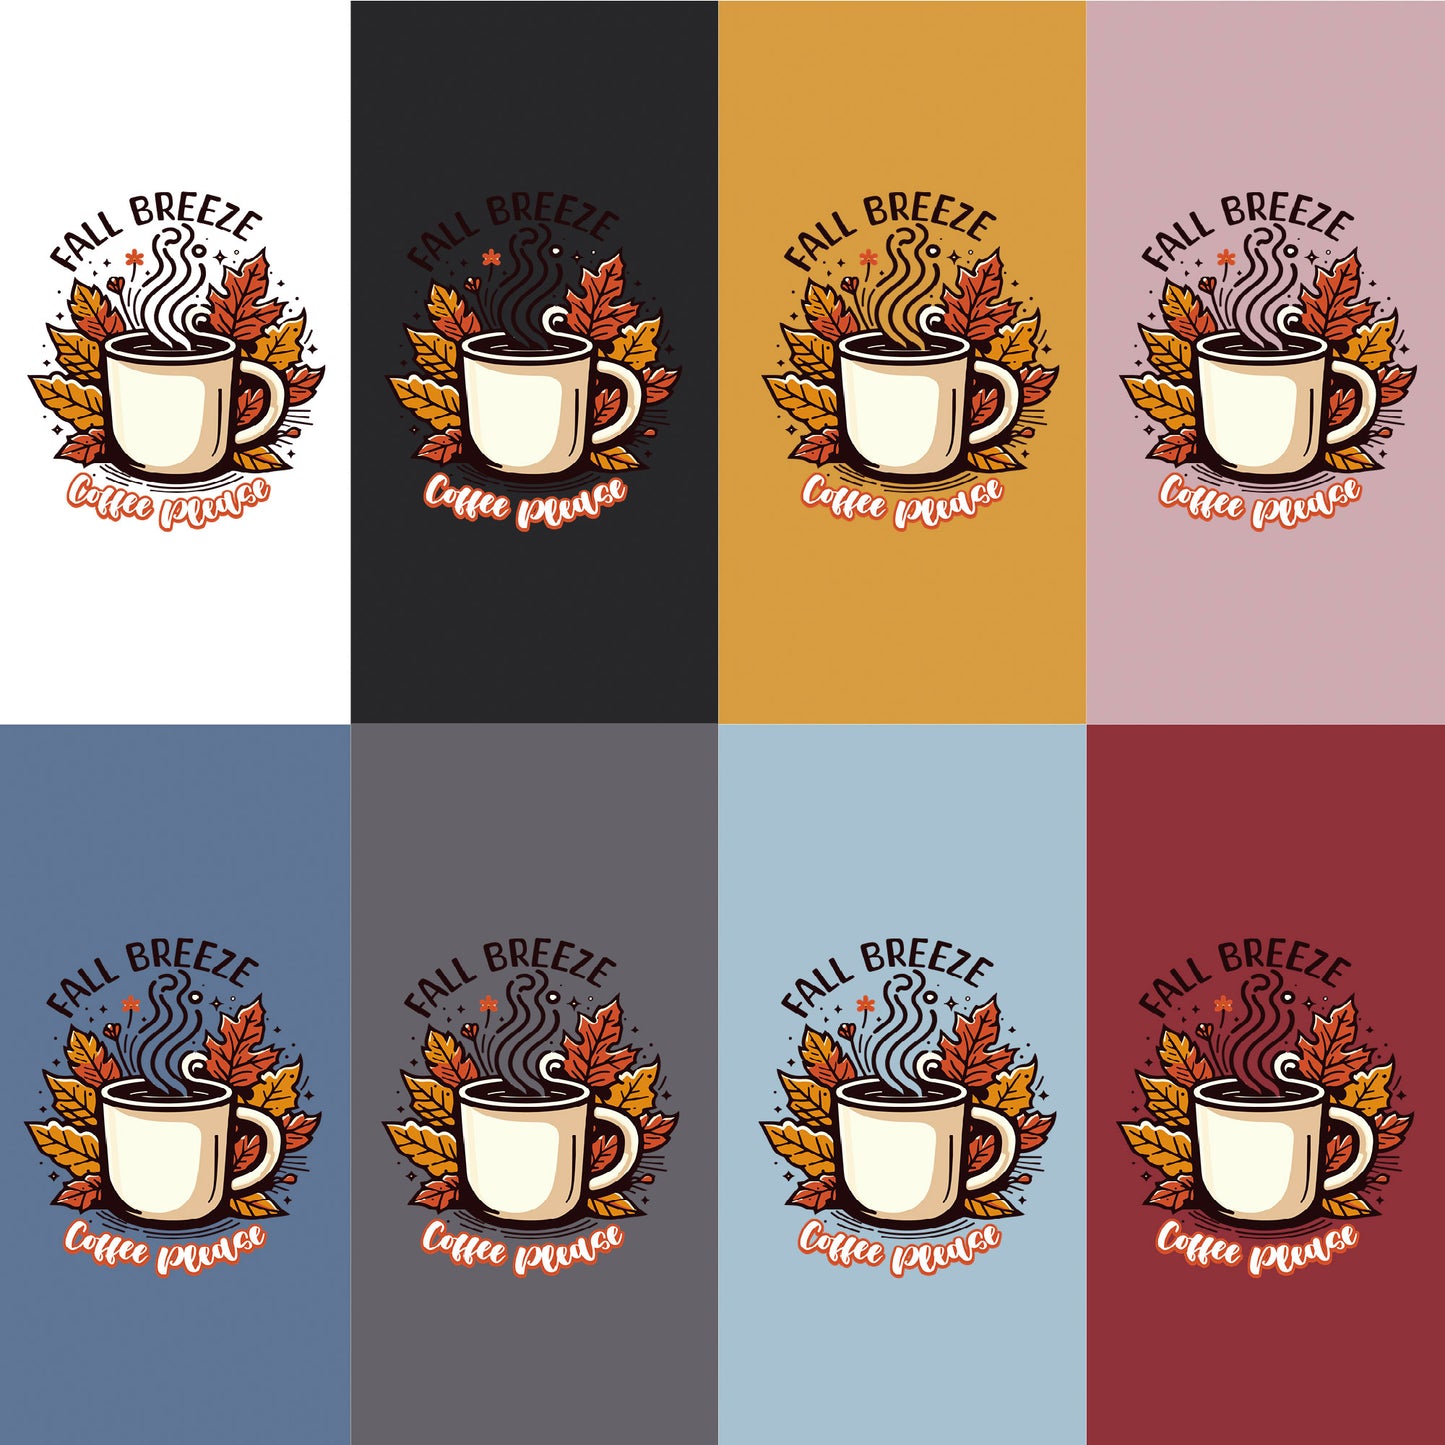 Sip in Style: 'Coffee Please' Shirt featuring a Cup Adorned with Autumn Leaves